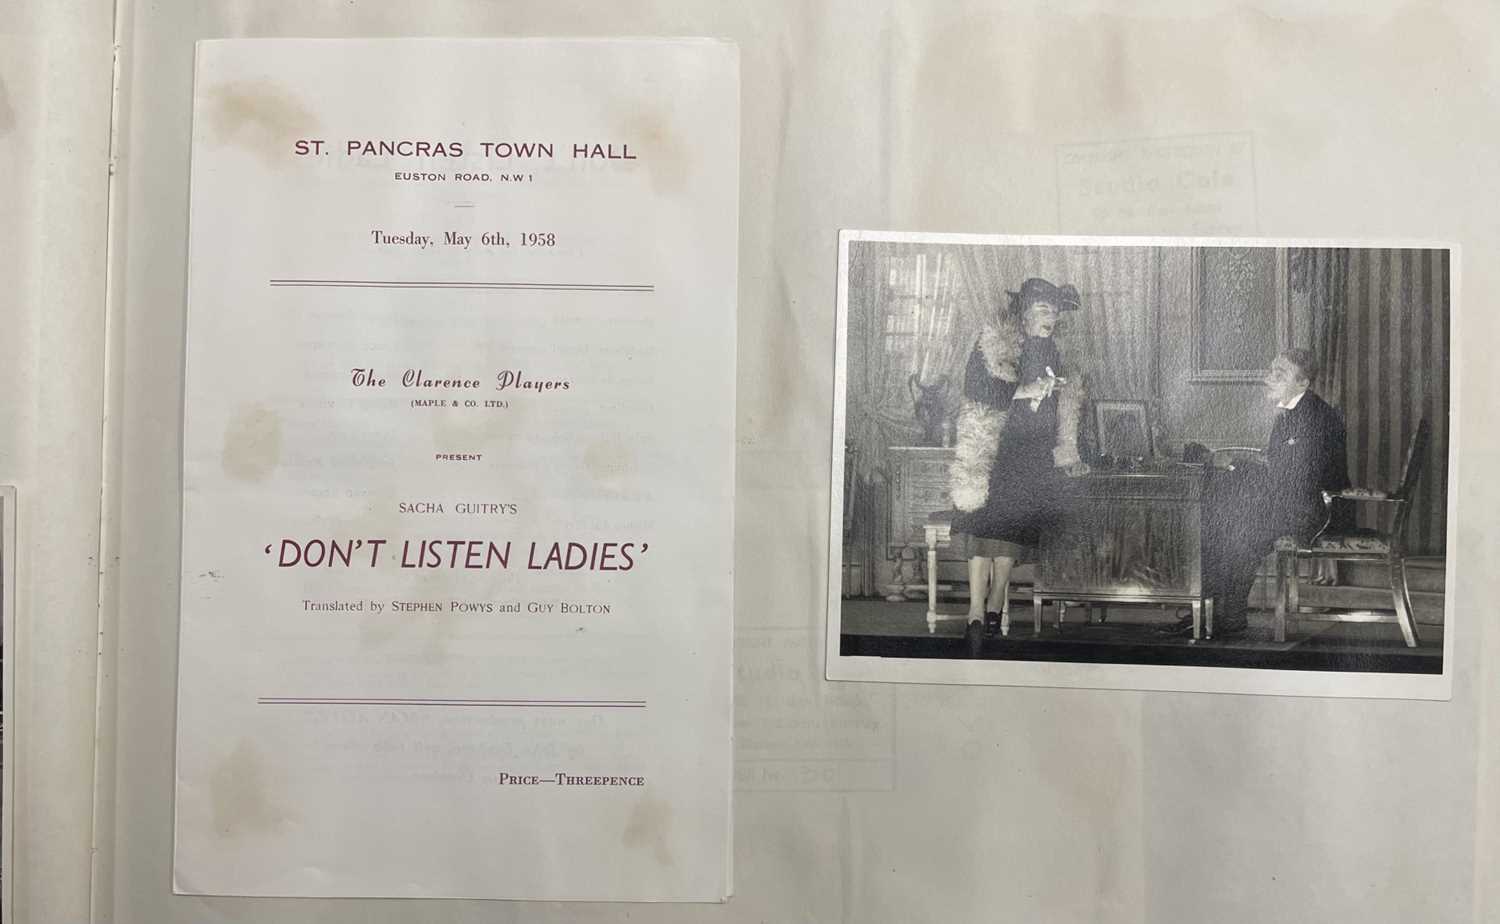 Autograph and Album with Theatrical Photos and Ephemera - Image 3 of 16